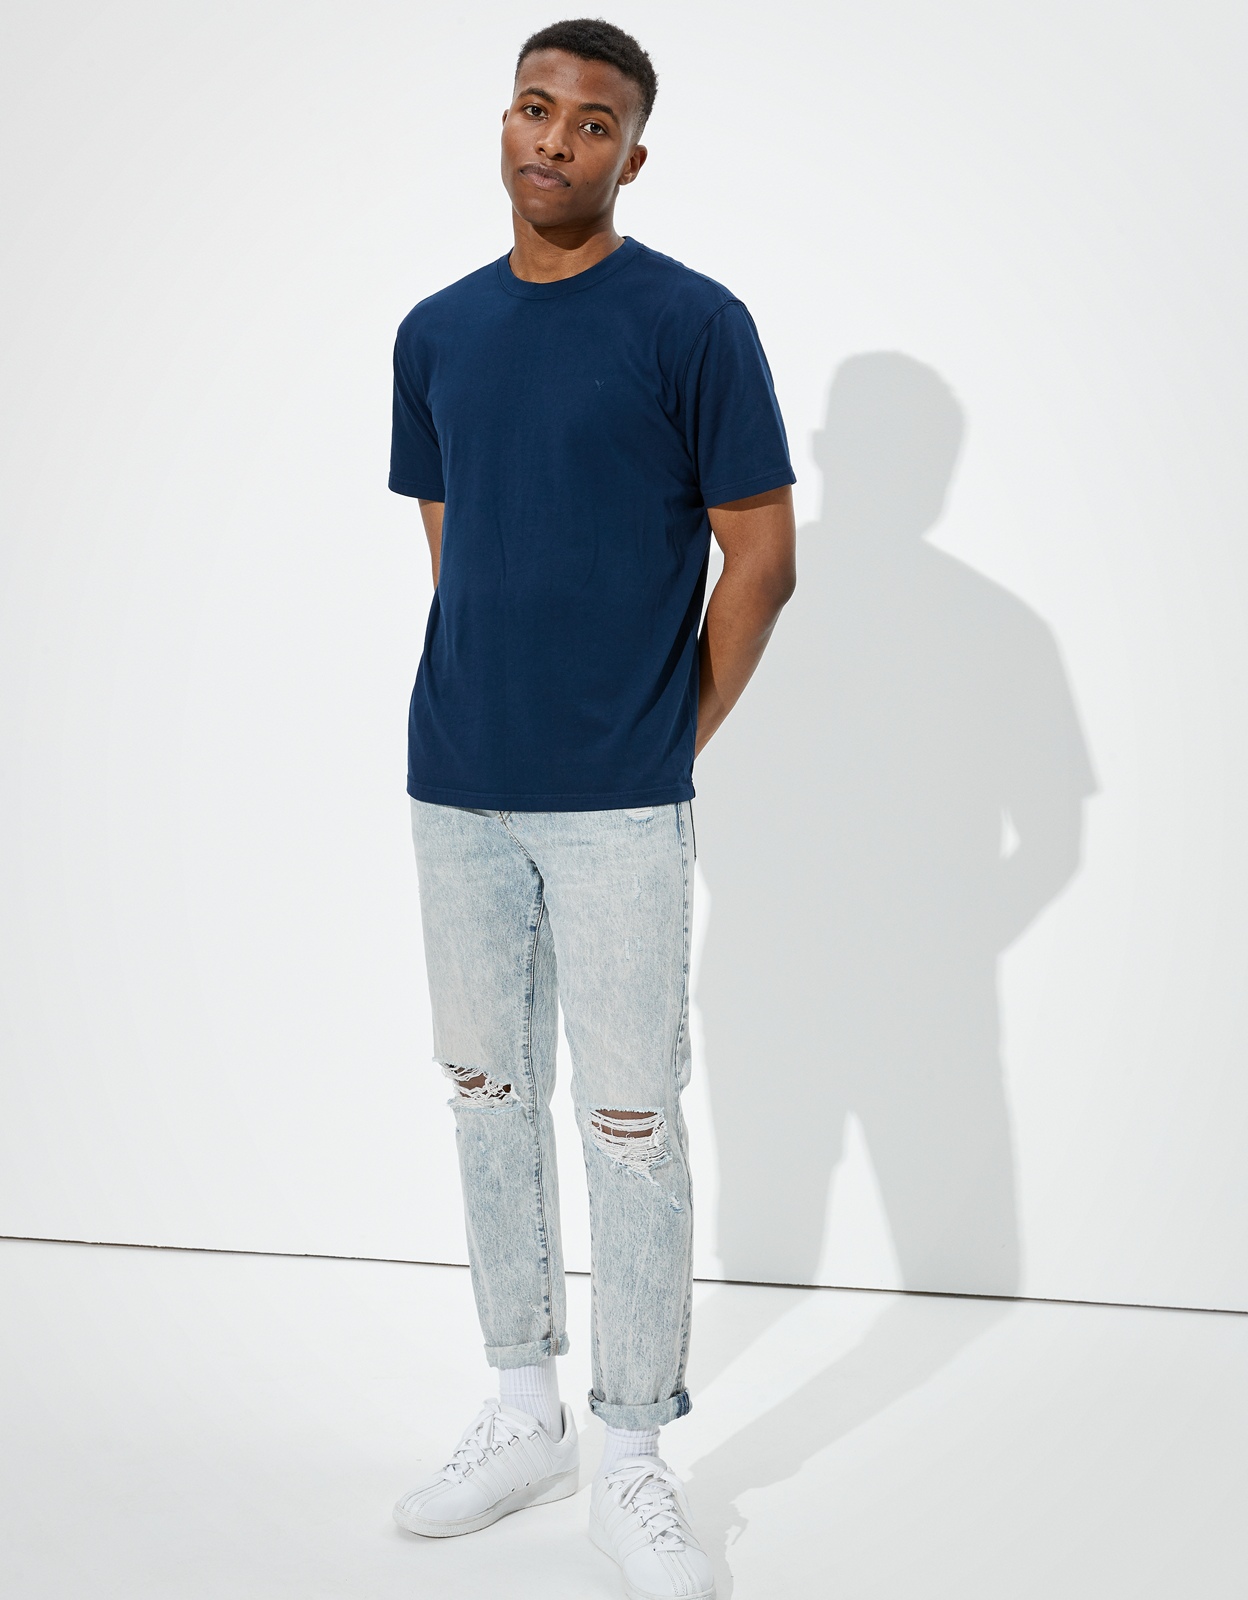 Shop AE Super Soft Icon T-Shirt online | American Eagle Outfitters KSA